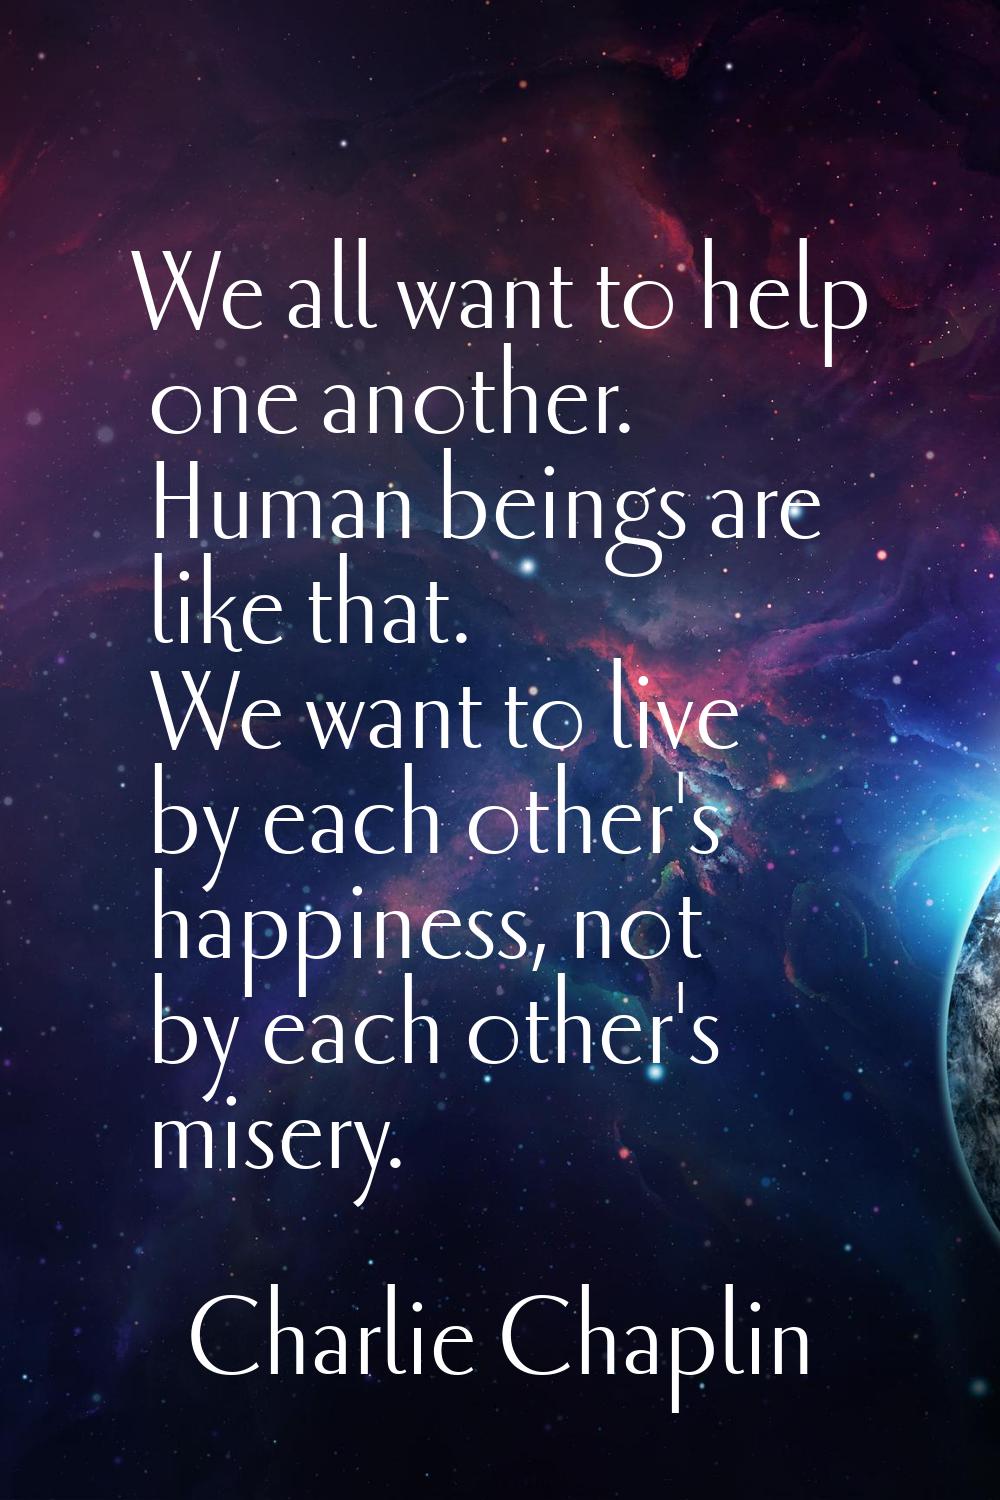 We all want to help one another. Human beings are like that. We want to live by each other's happin